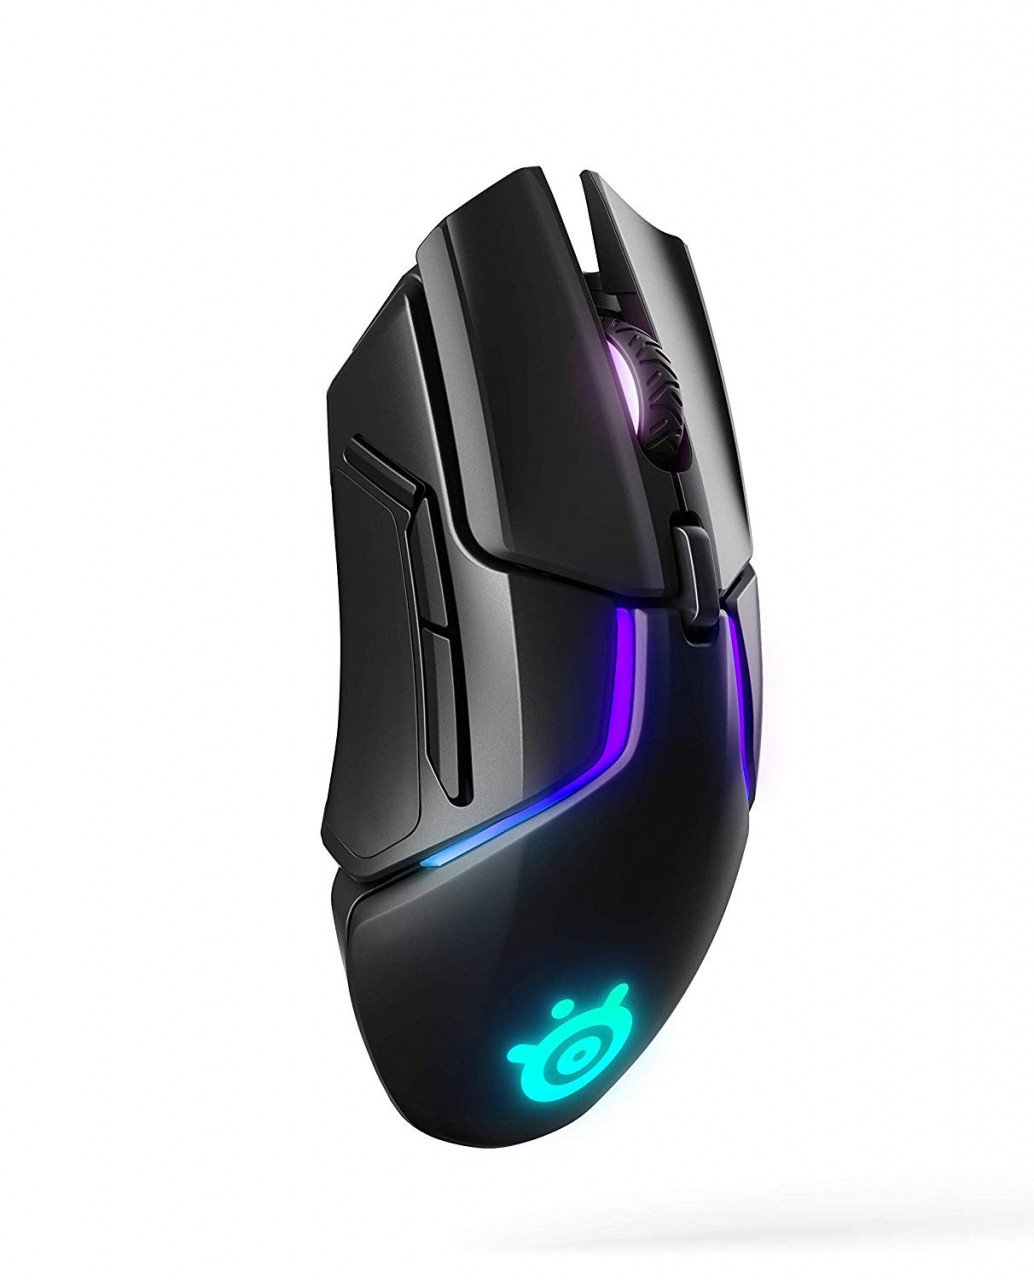 SteelSeries Rival 650 Wireless Gaming Mouse User Manual